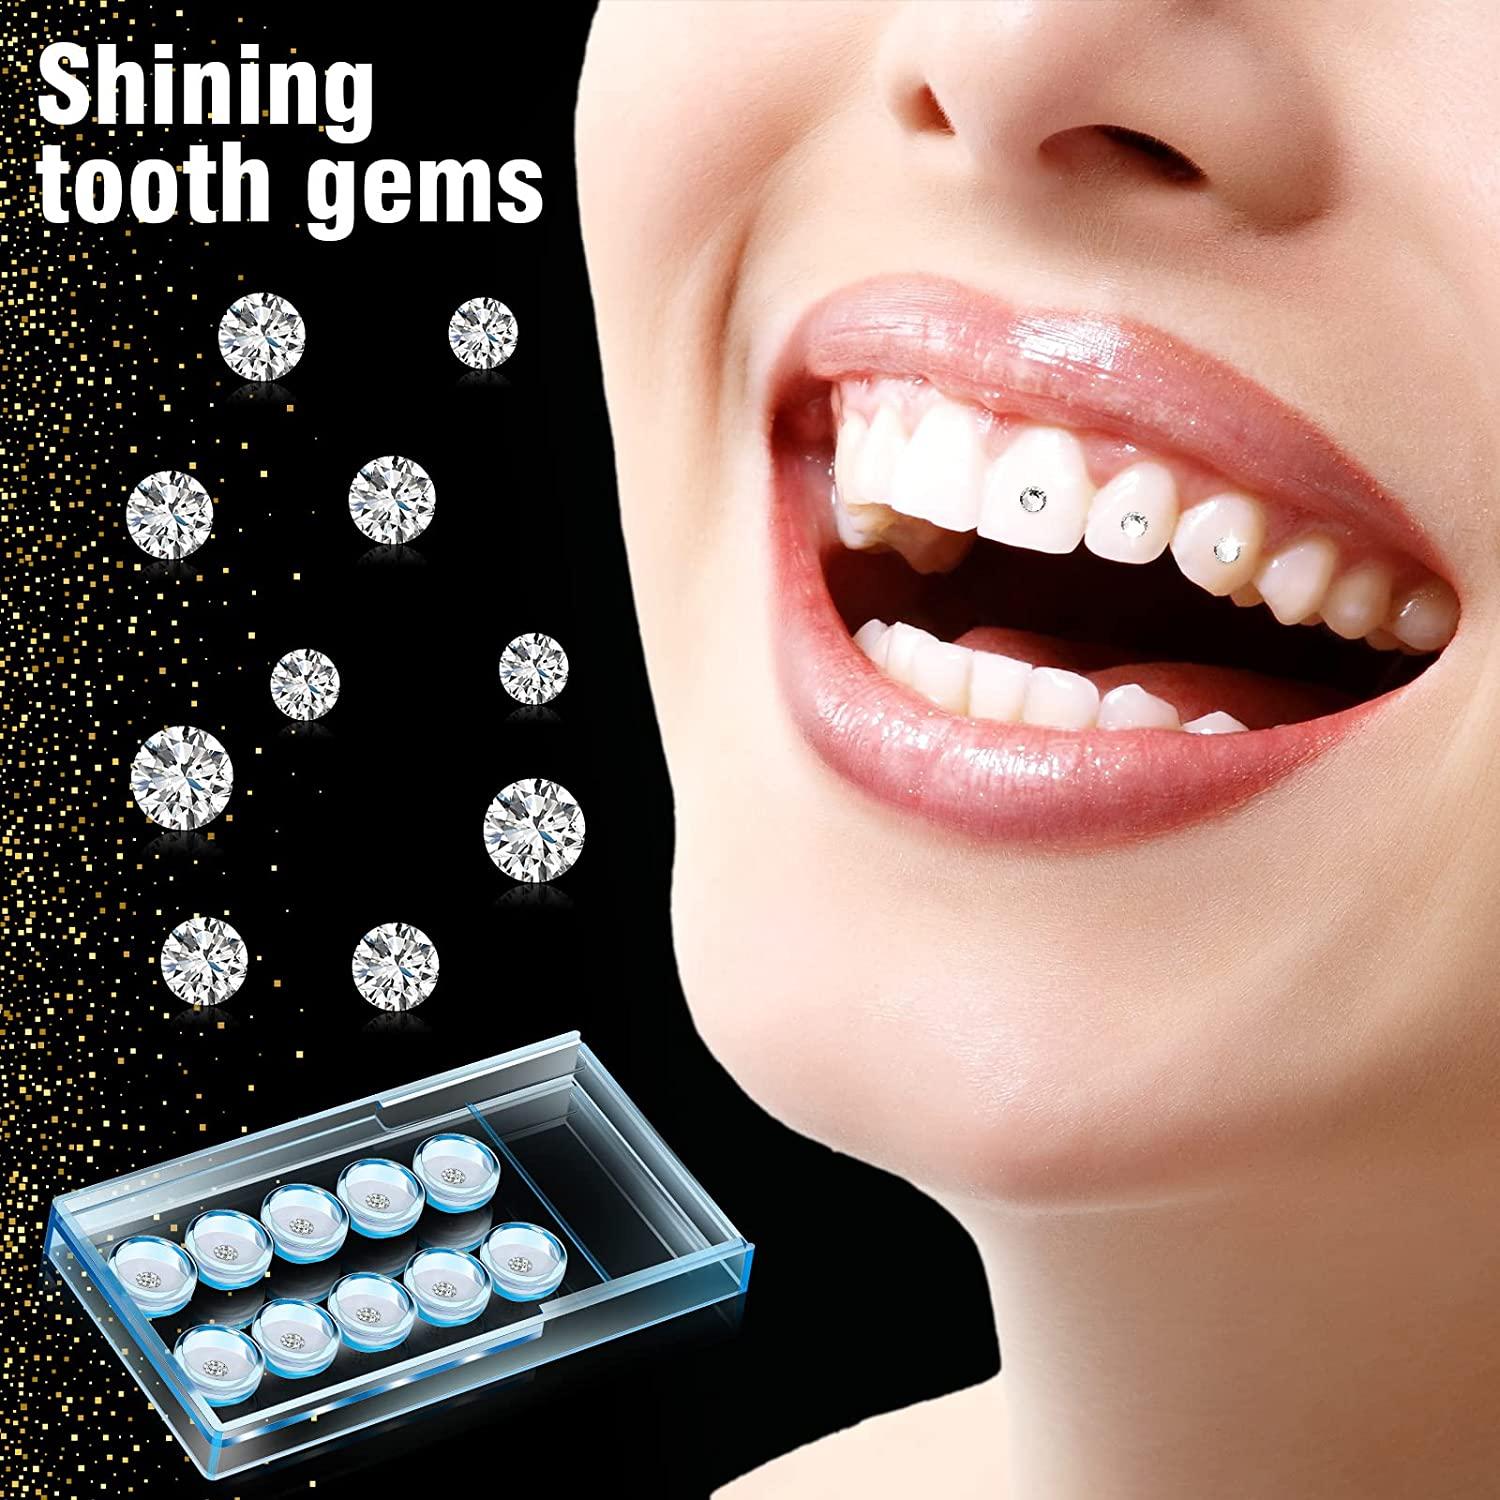 25 Pieces Tooth Gem Kit Tooth Jewelry Kit Fashionable Removable Tooth  Ornaments Artificial Crystal Tooth Ornaments for Reflective Teeth Ornament